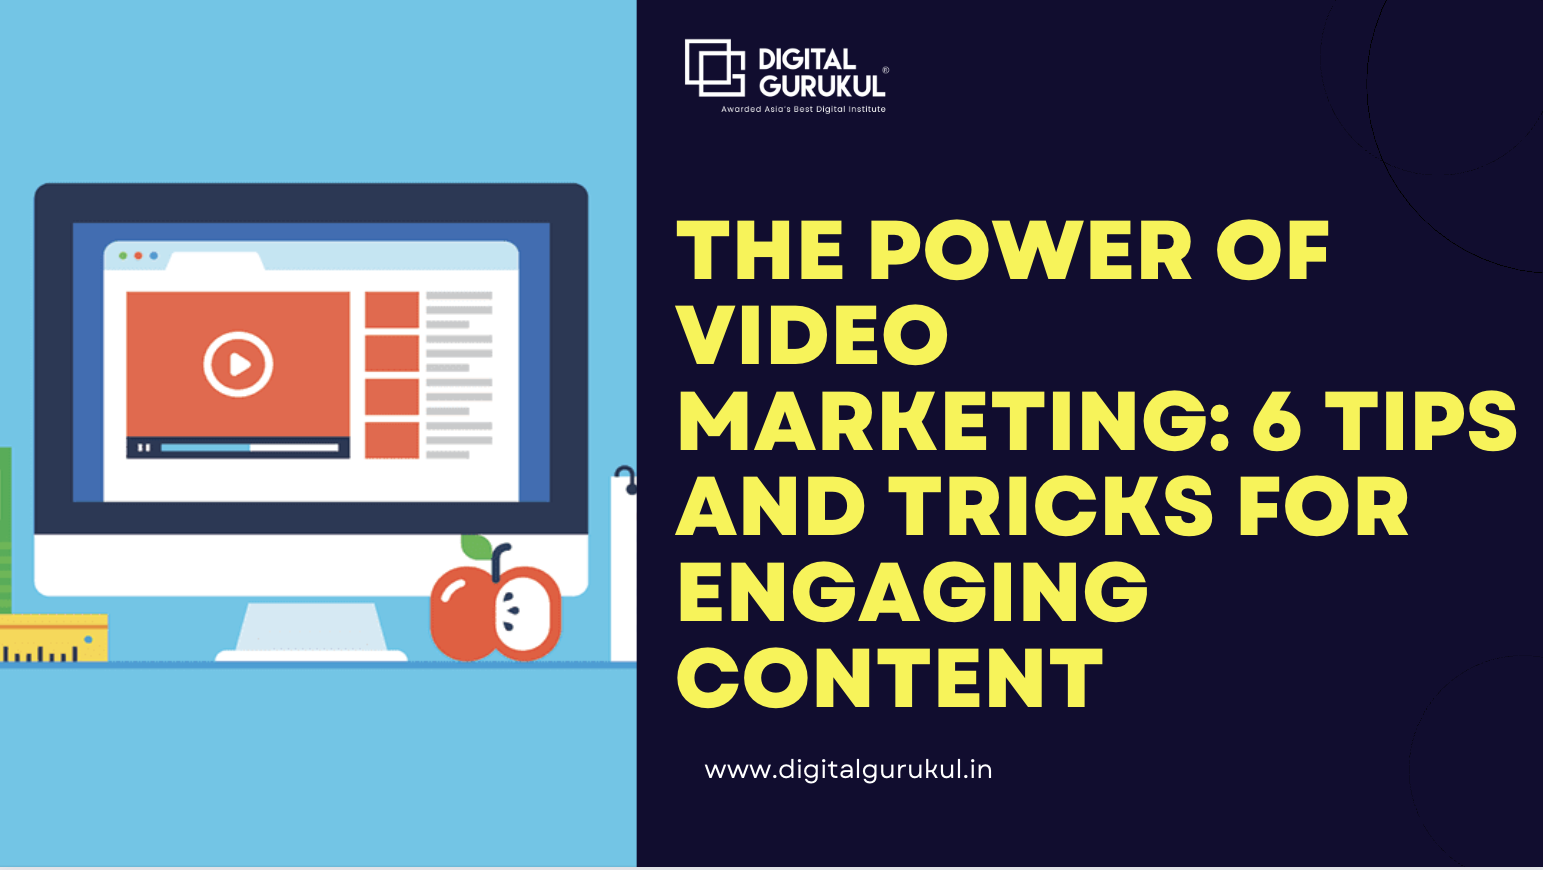 The Power of Video Marketing: 6 Tips and Tricks for Engaging Content